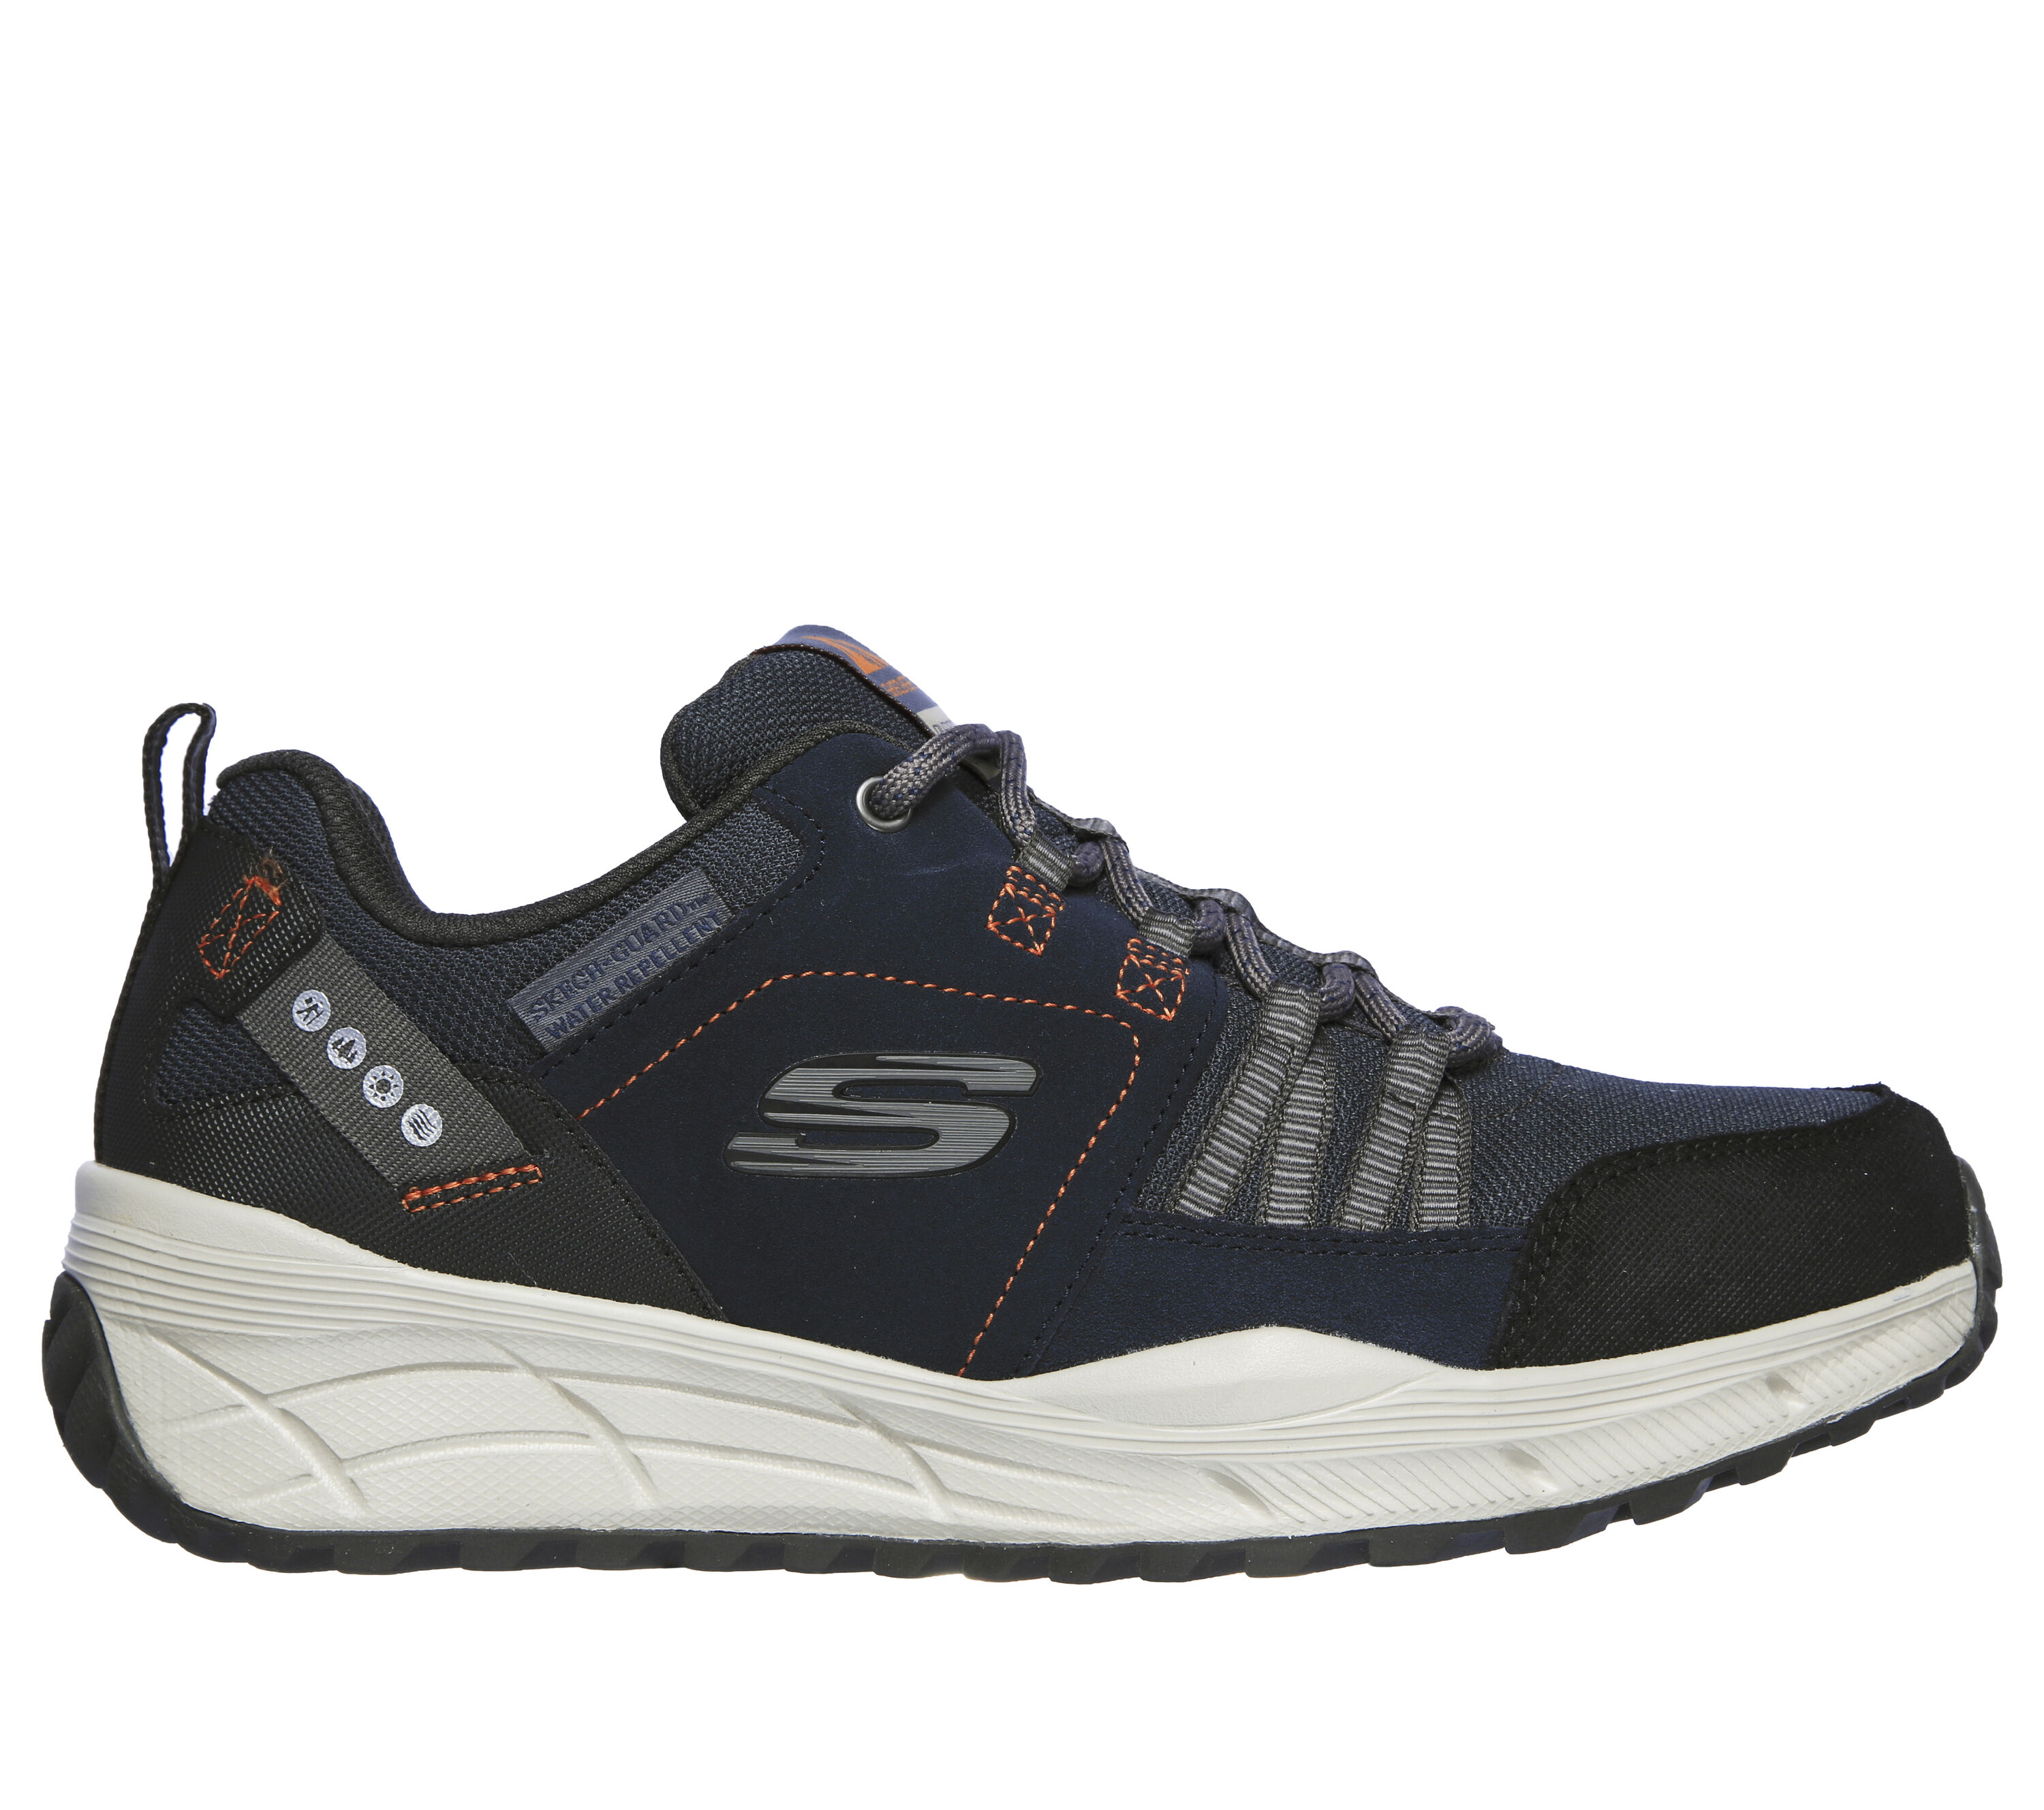 Shop the Relaxed Fit: Equalizer 4.0 Trail | SKECHERS